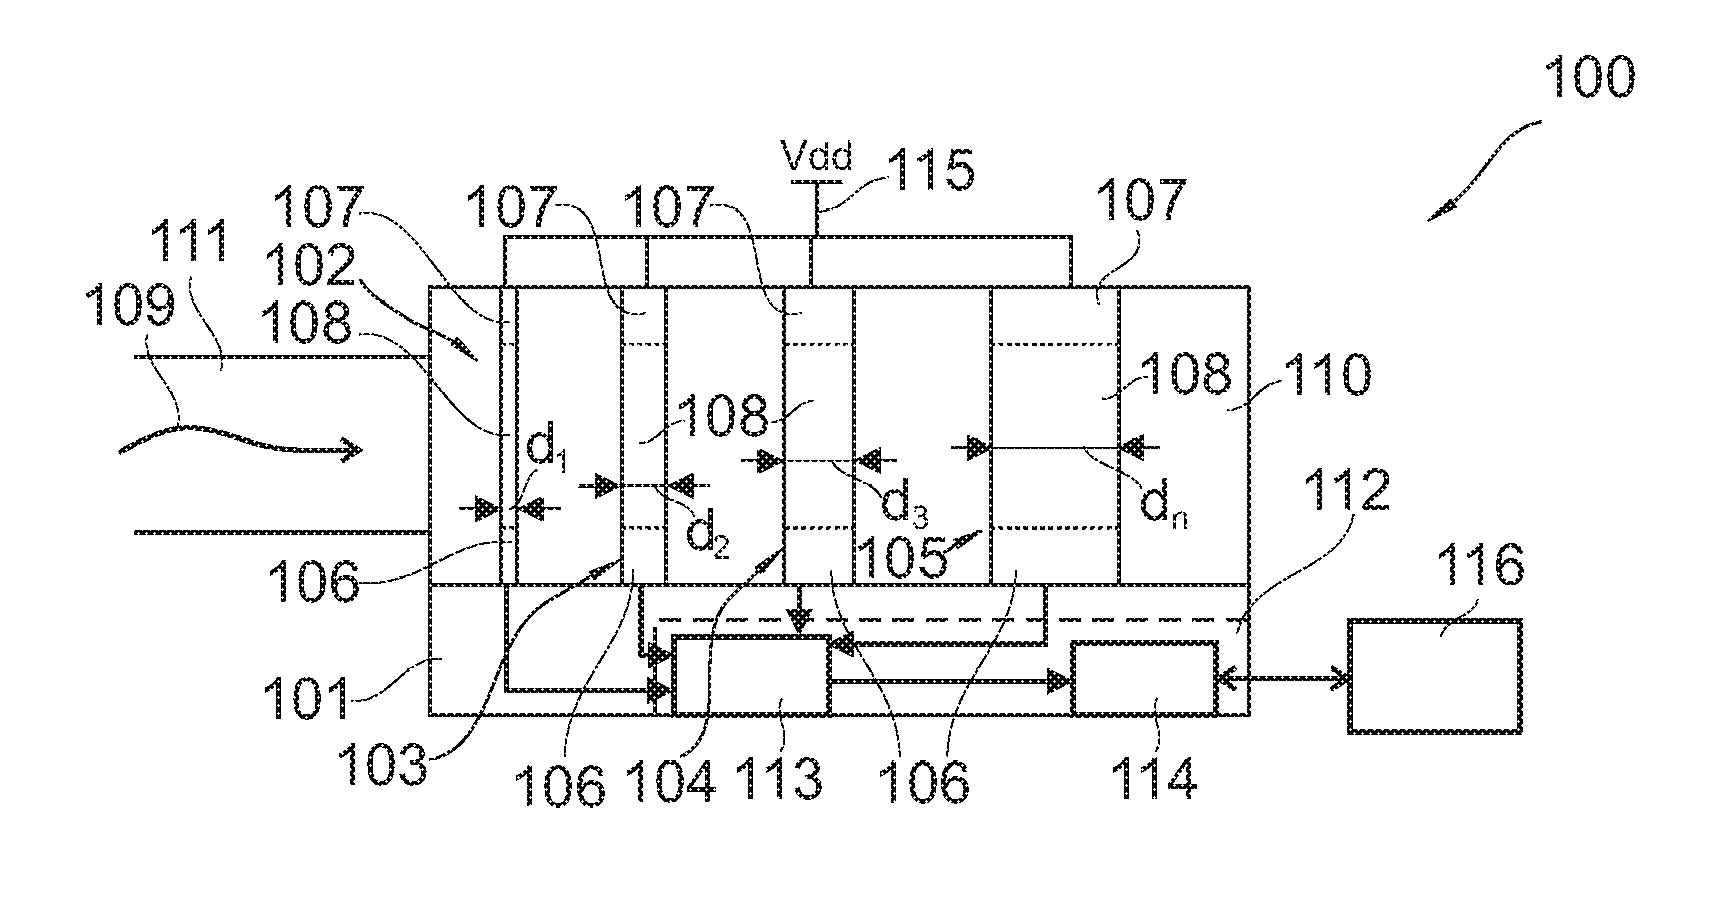 Photosensitive device and method of manufacturing a photosensitive device using nanowire diodes